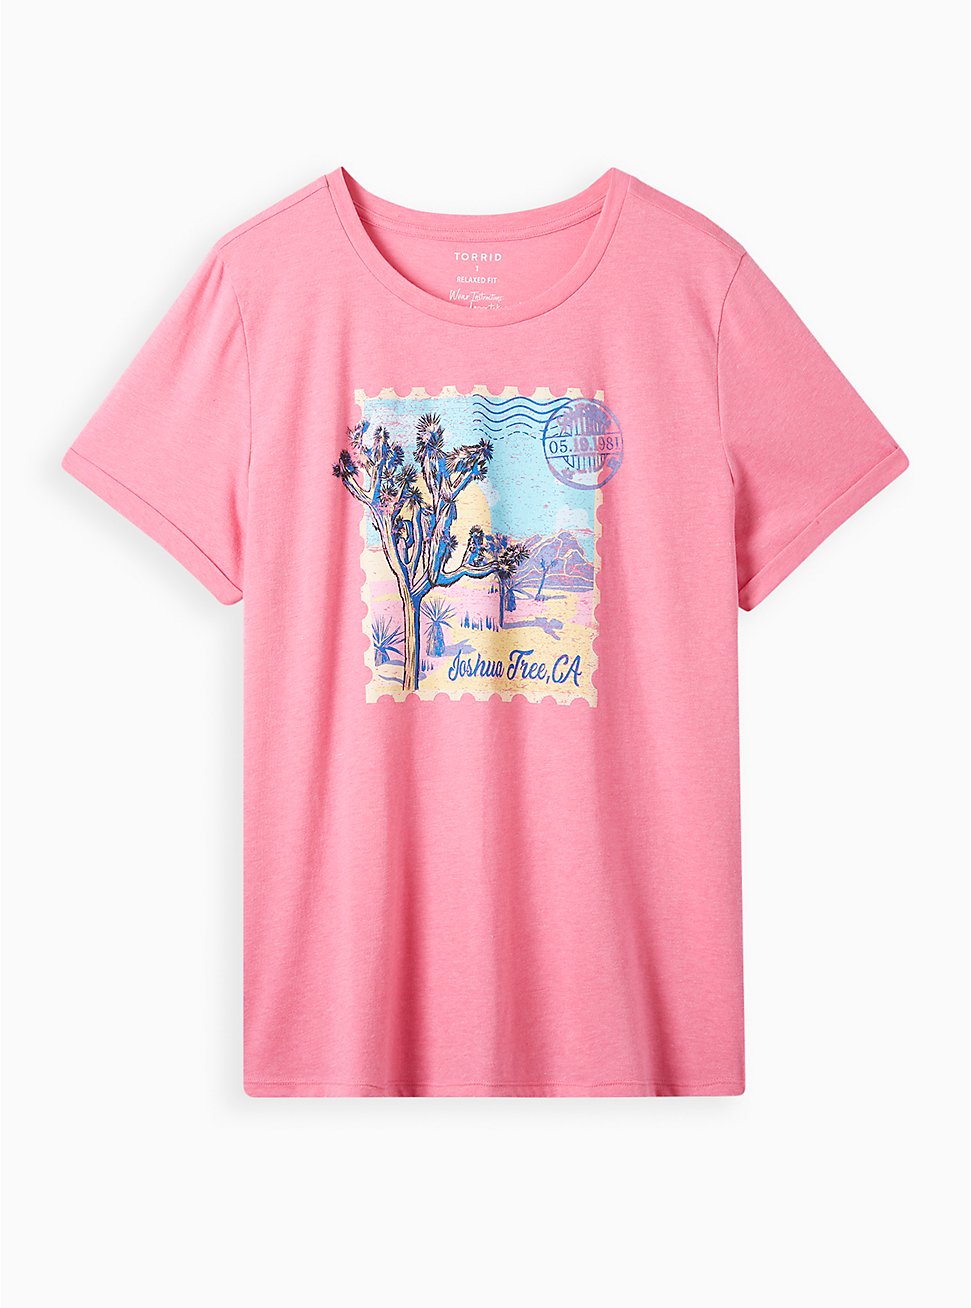 Classic Fit Tee - Signature Jersey Pink Joshua Tree, PINK GLO, hi-res